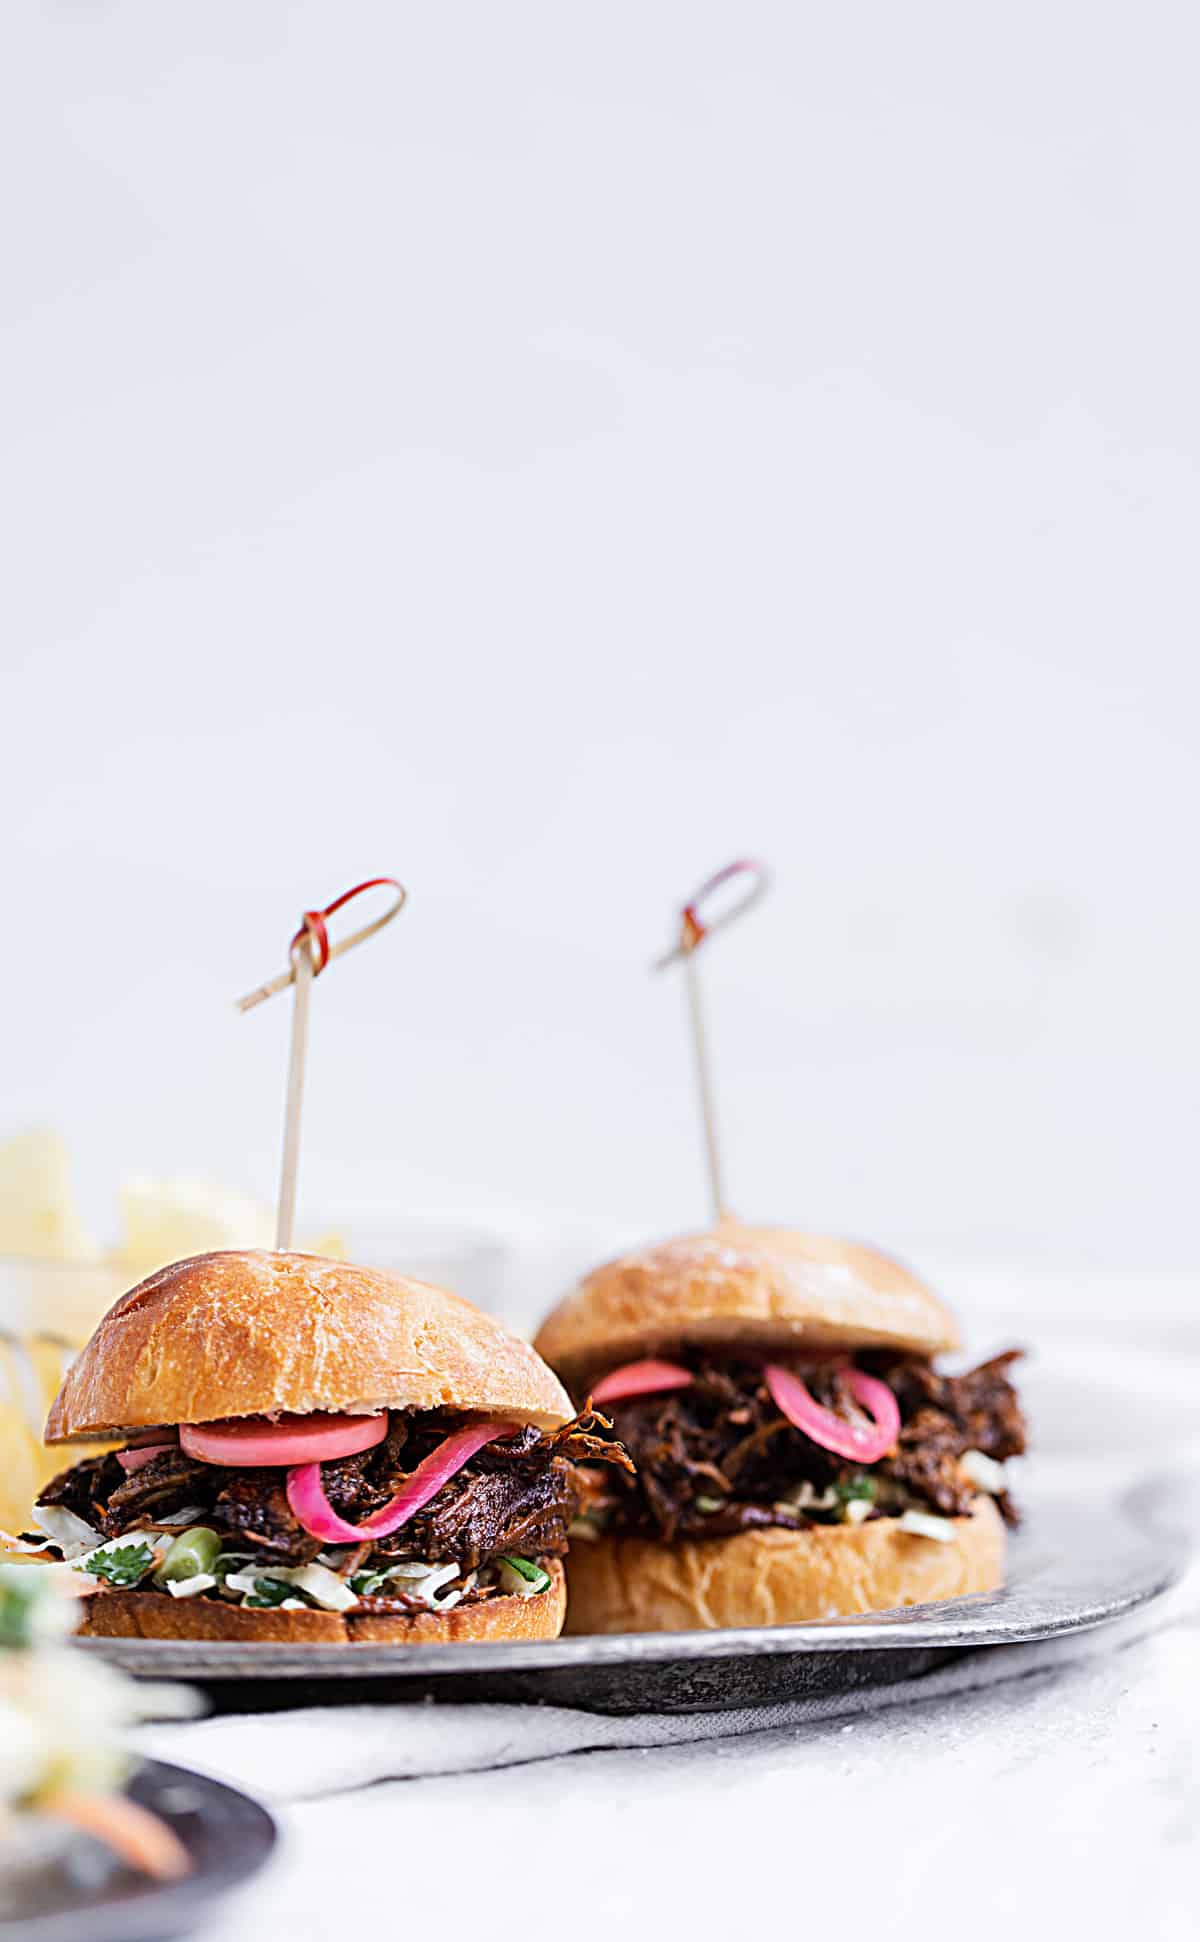 Seasoned with cocoa chili dry rub, braised until fall-apart tender and crispy, bathed in chocolate chili barbecue sauce and piled high with cilantro lime coleslaw and quick pickled onions and radishes